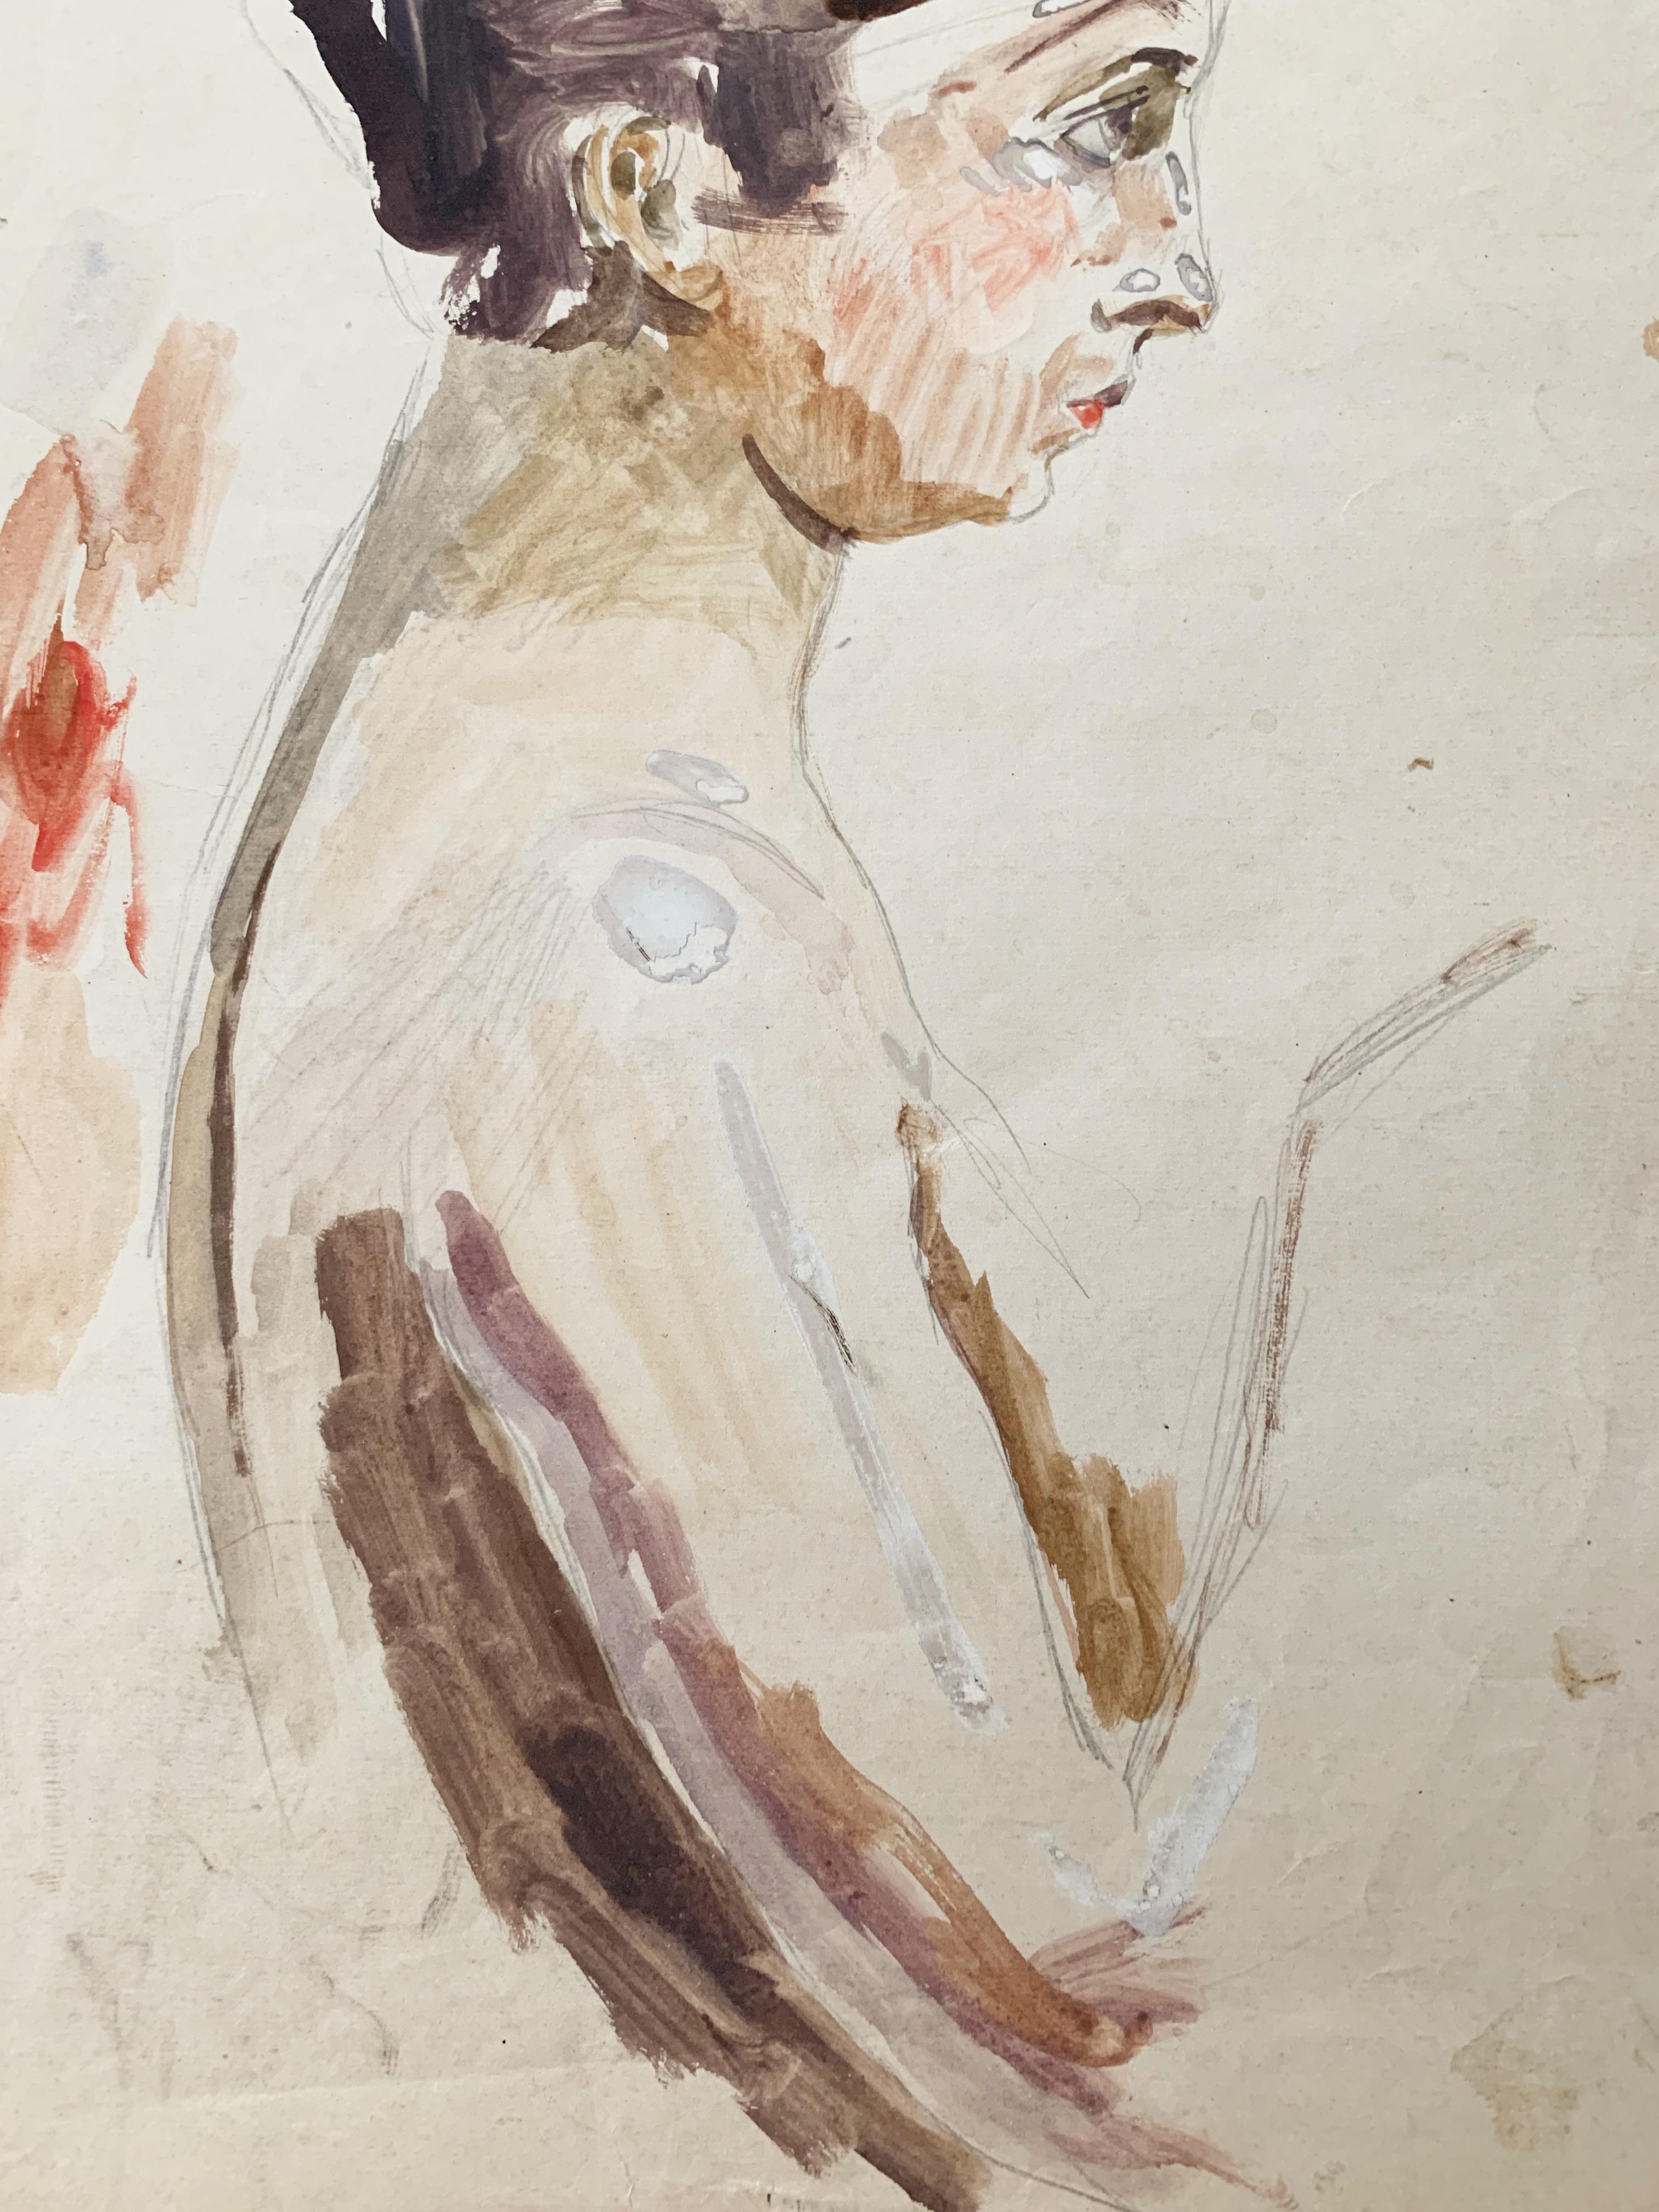 Raphael DELORME (1886-1962)
Study of a woman in profile
Watercolor, gouache and pencil on paper
Illegible annotation in the lower right corner
31 x 20 cm
Small needle holes at the top, small stains

Born in 1885 in Bordeaux, Raphaël Delorme is one